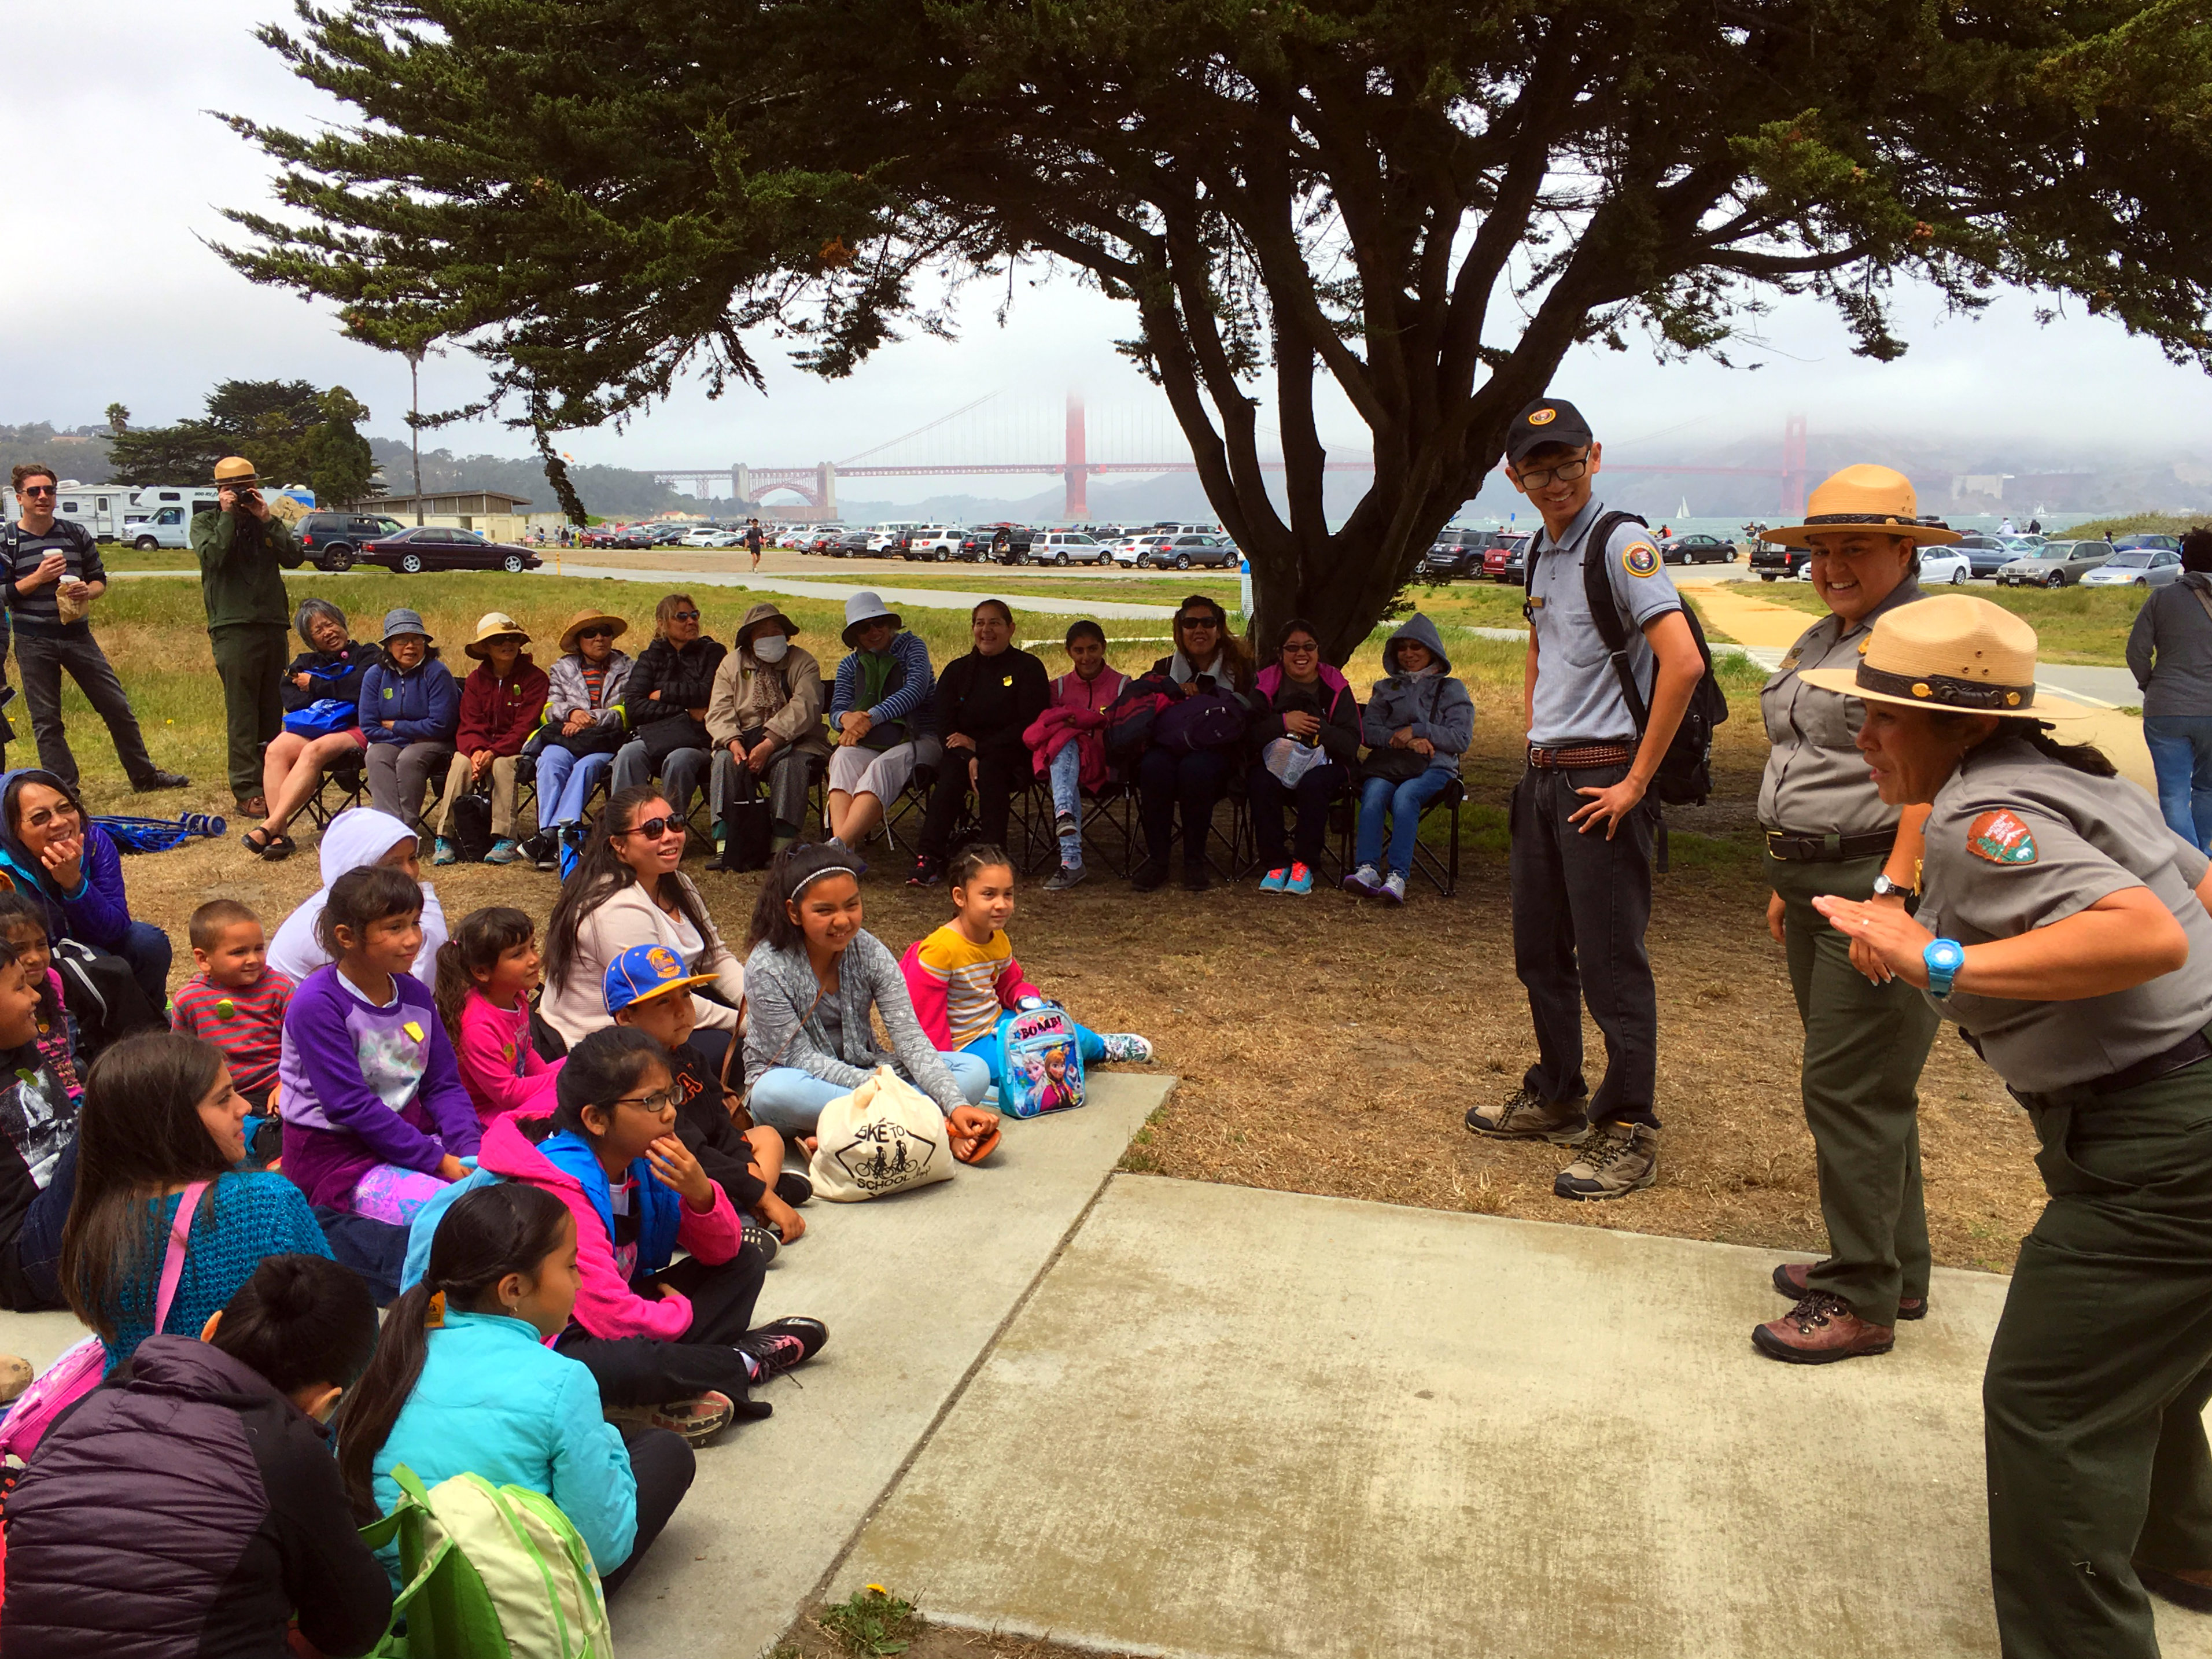 Park rangers explain flora and fauna at Chrissy Field to a group of visitors from the Mission District who took free shuttles to Chrissy Field. 